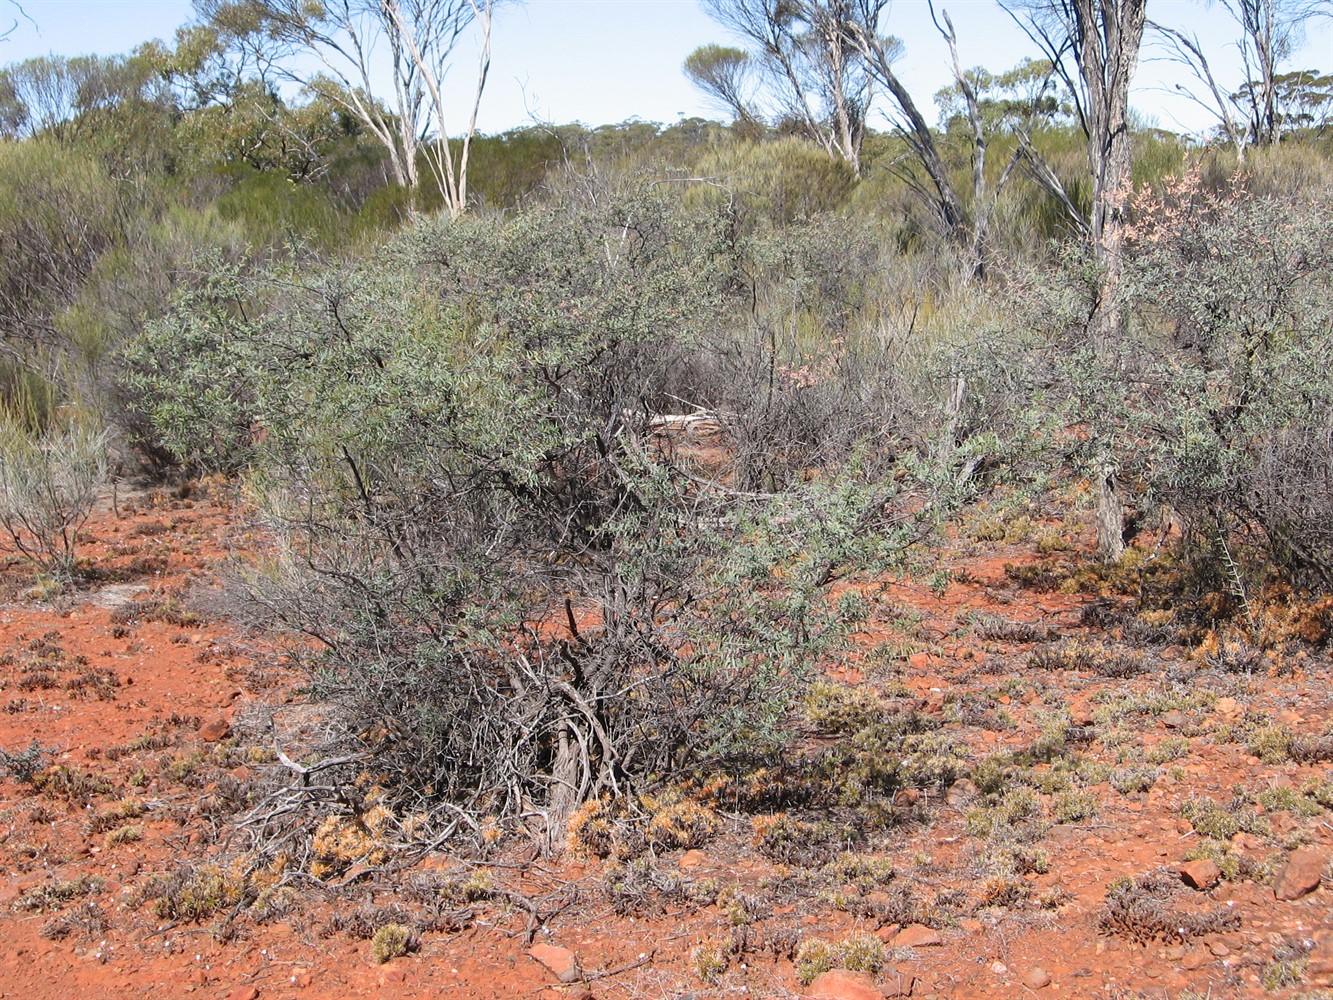 Habit showing normal-coloured foliage.